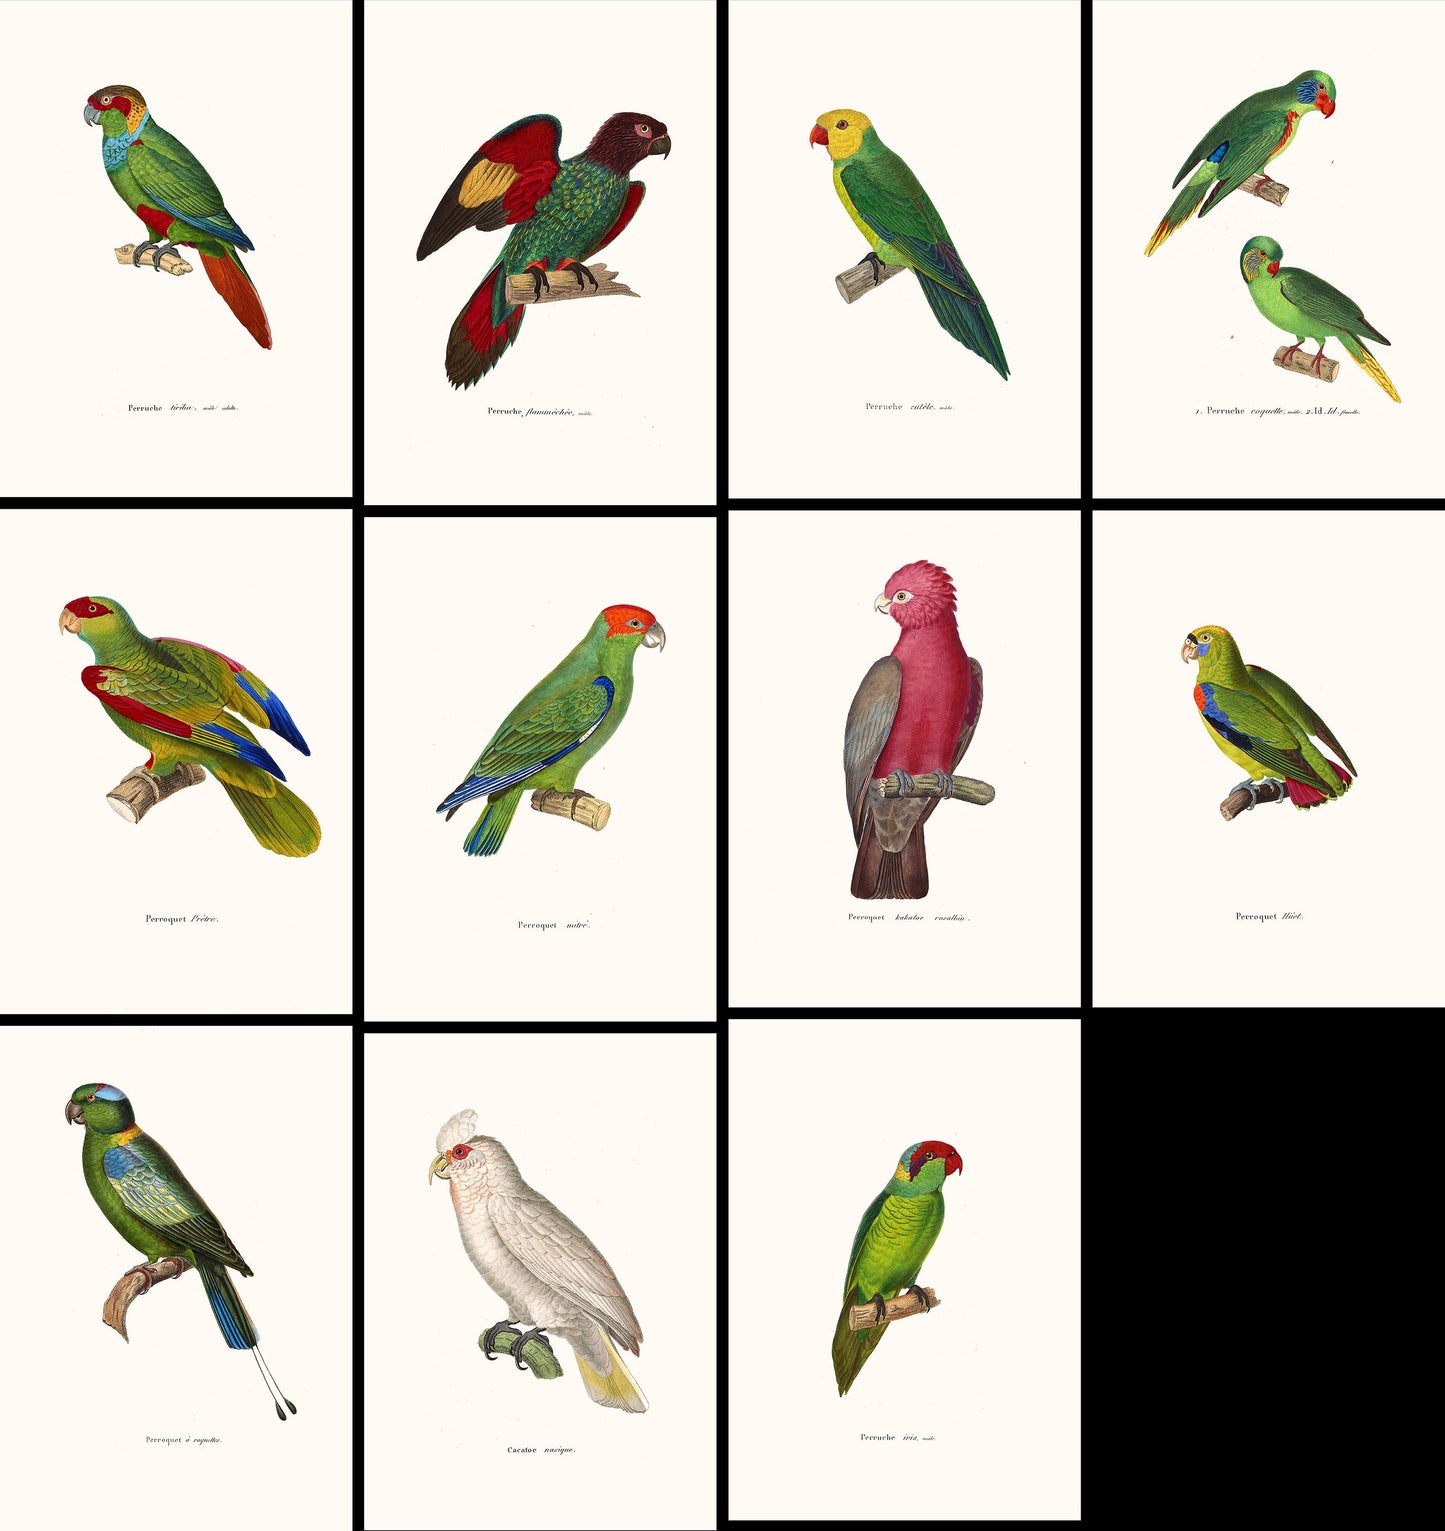 The New Collection of Painted Birds Parrots [11 Images]